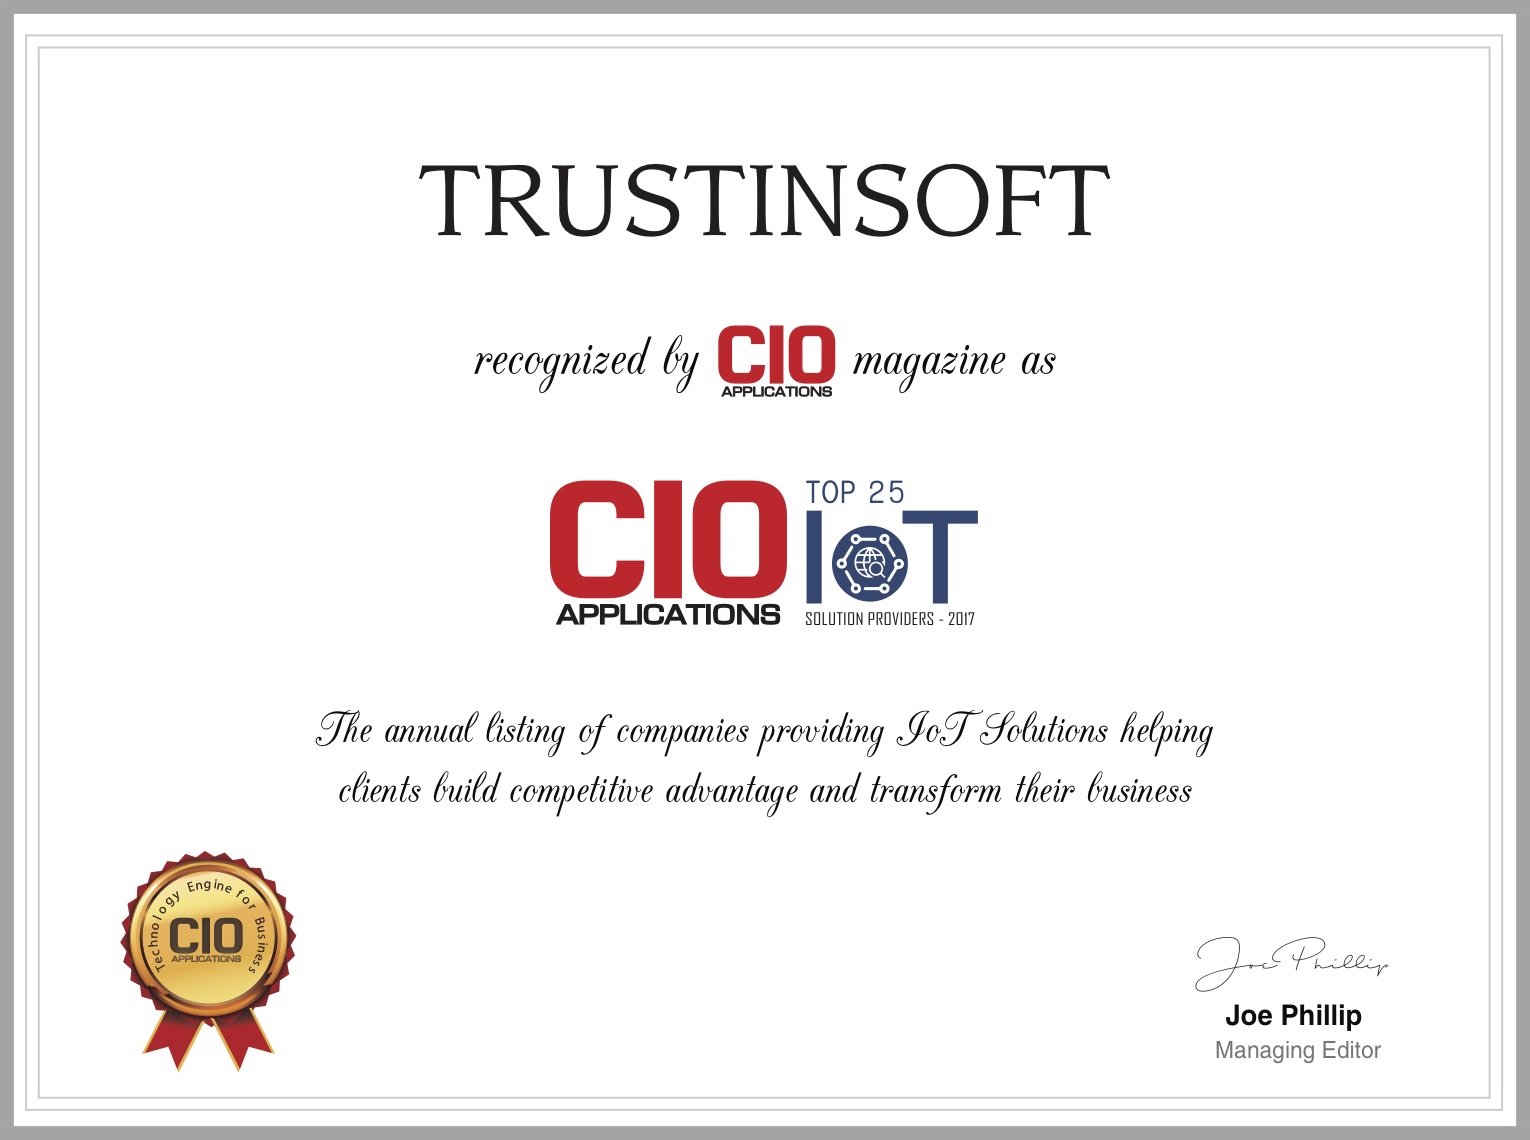 graphic: CIO applications magazine recognizes TrustinSoft as on of the Top 25 IoT solution providers,